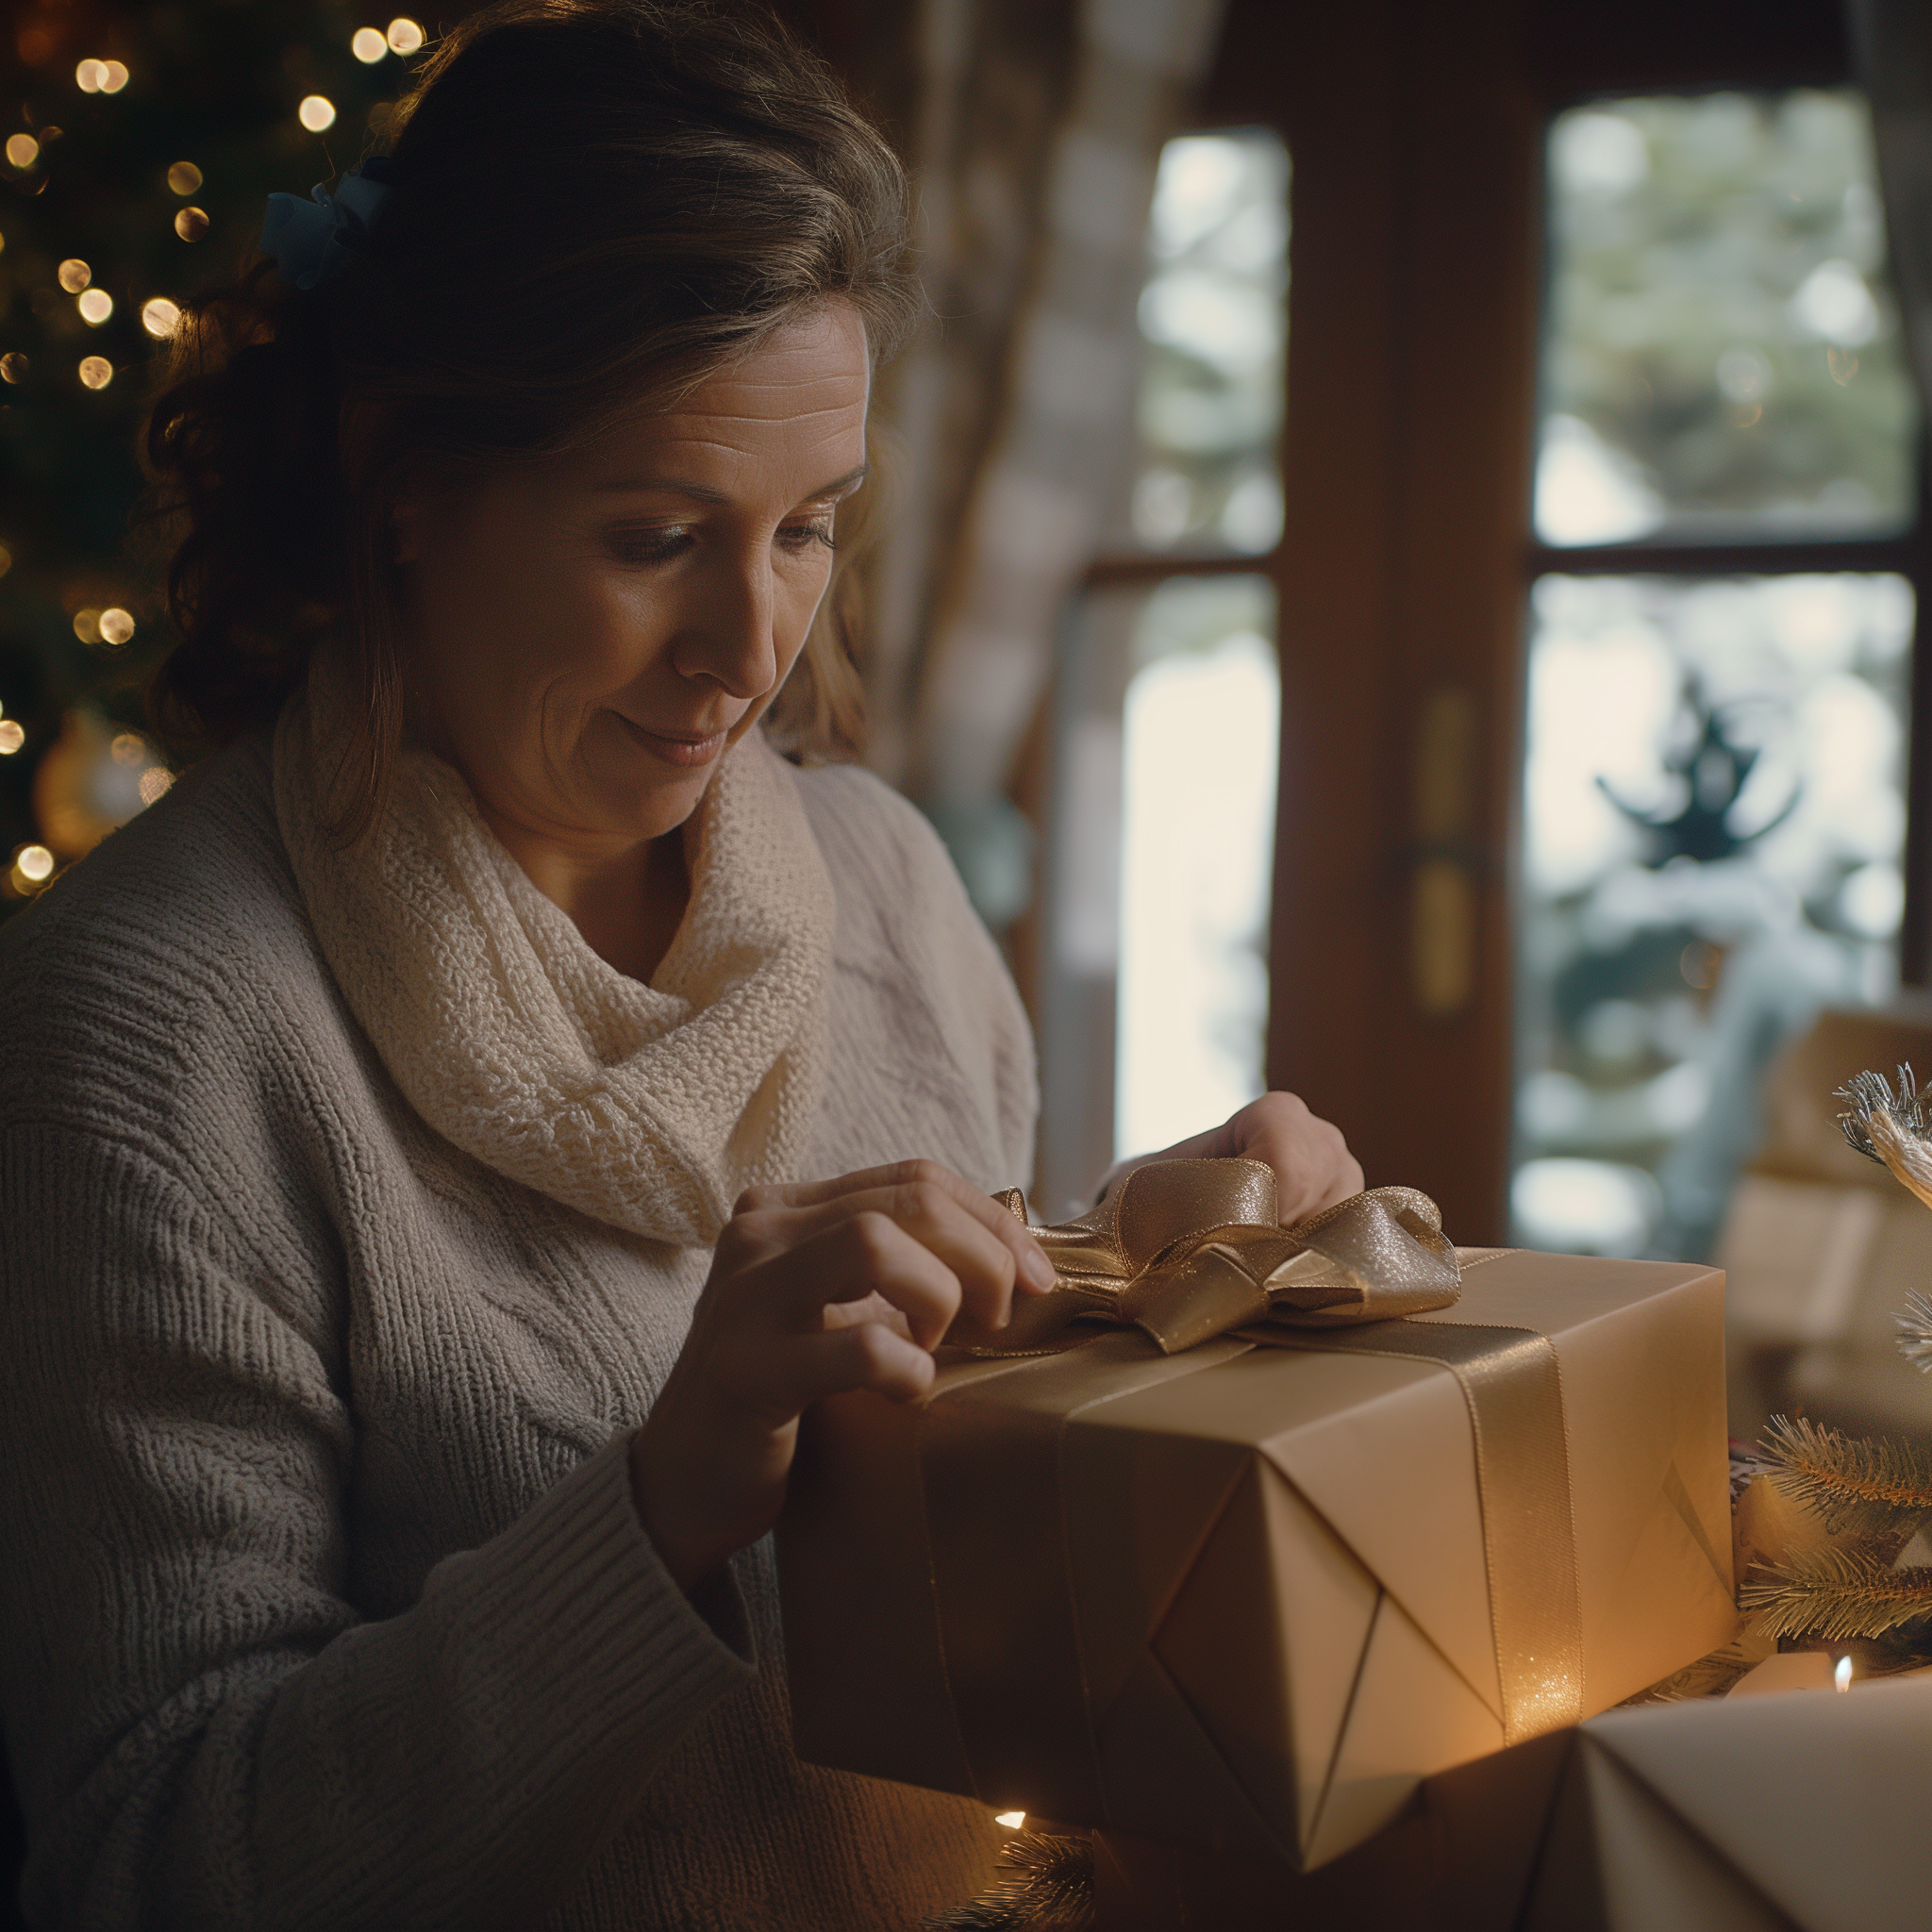 A woman unwrapping a gift | Source: Midjourney